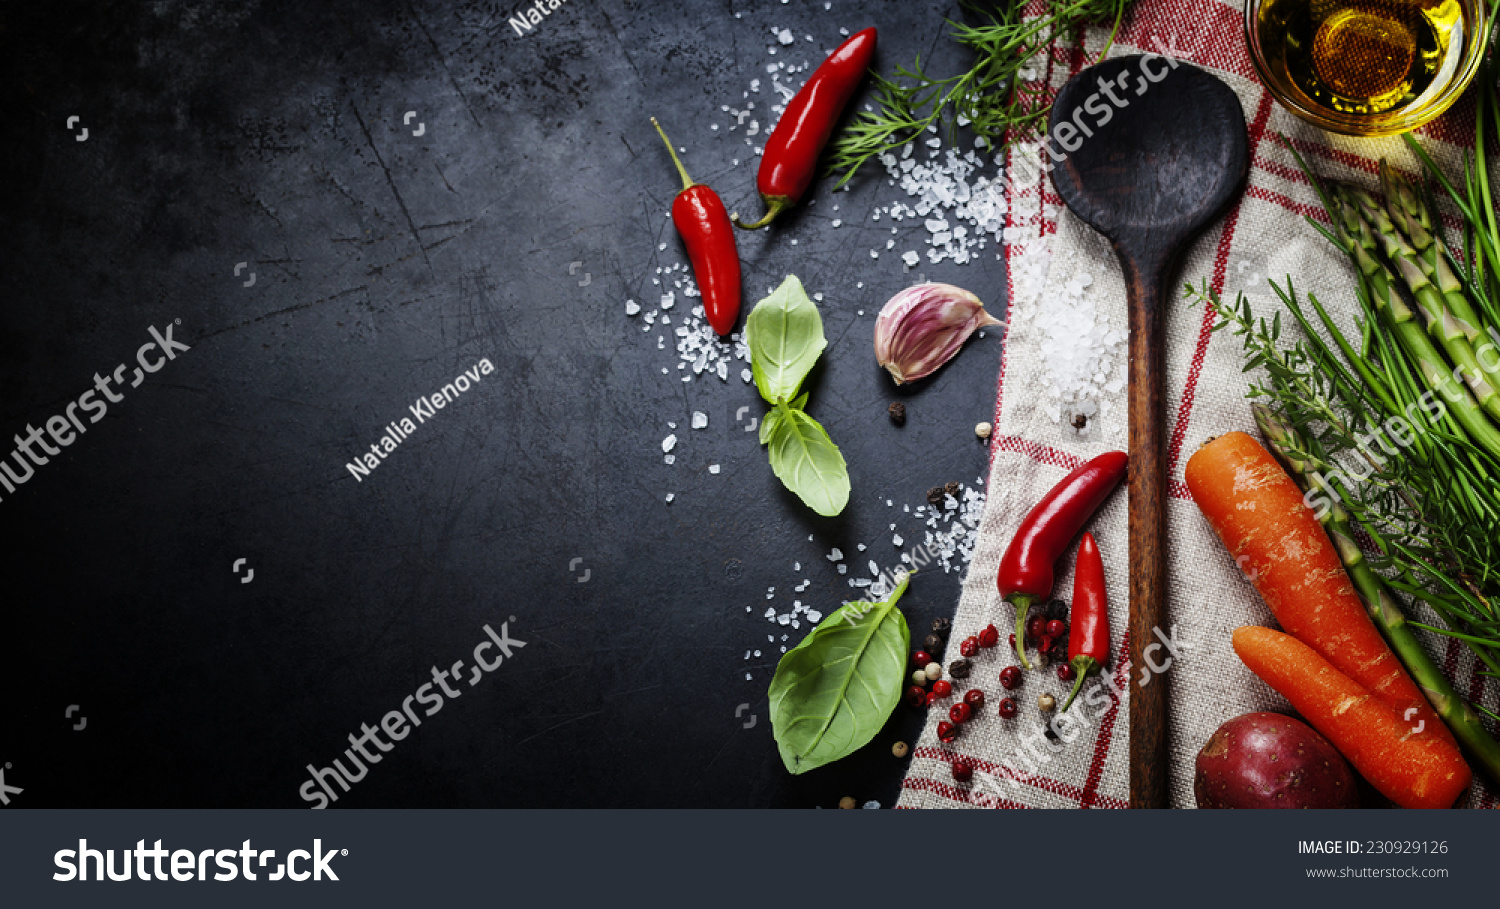 Wooden spoon and ingredients on dark background. Vegetarian food, health or cooking concept. #230929126